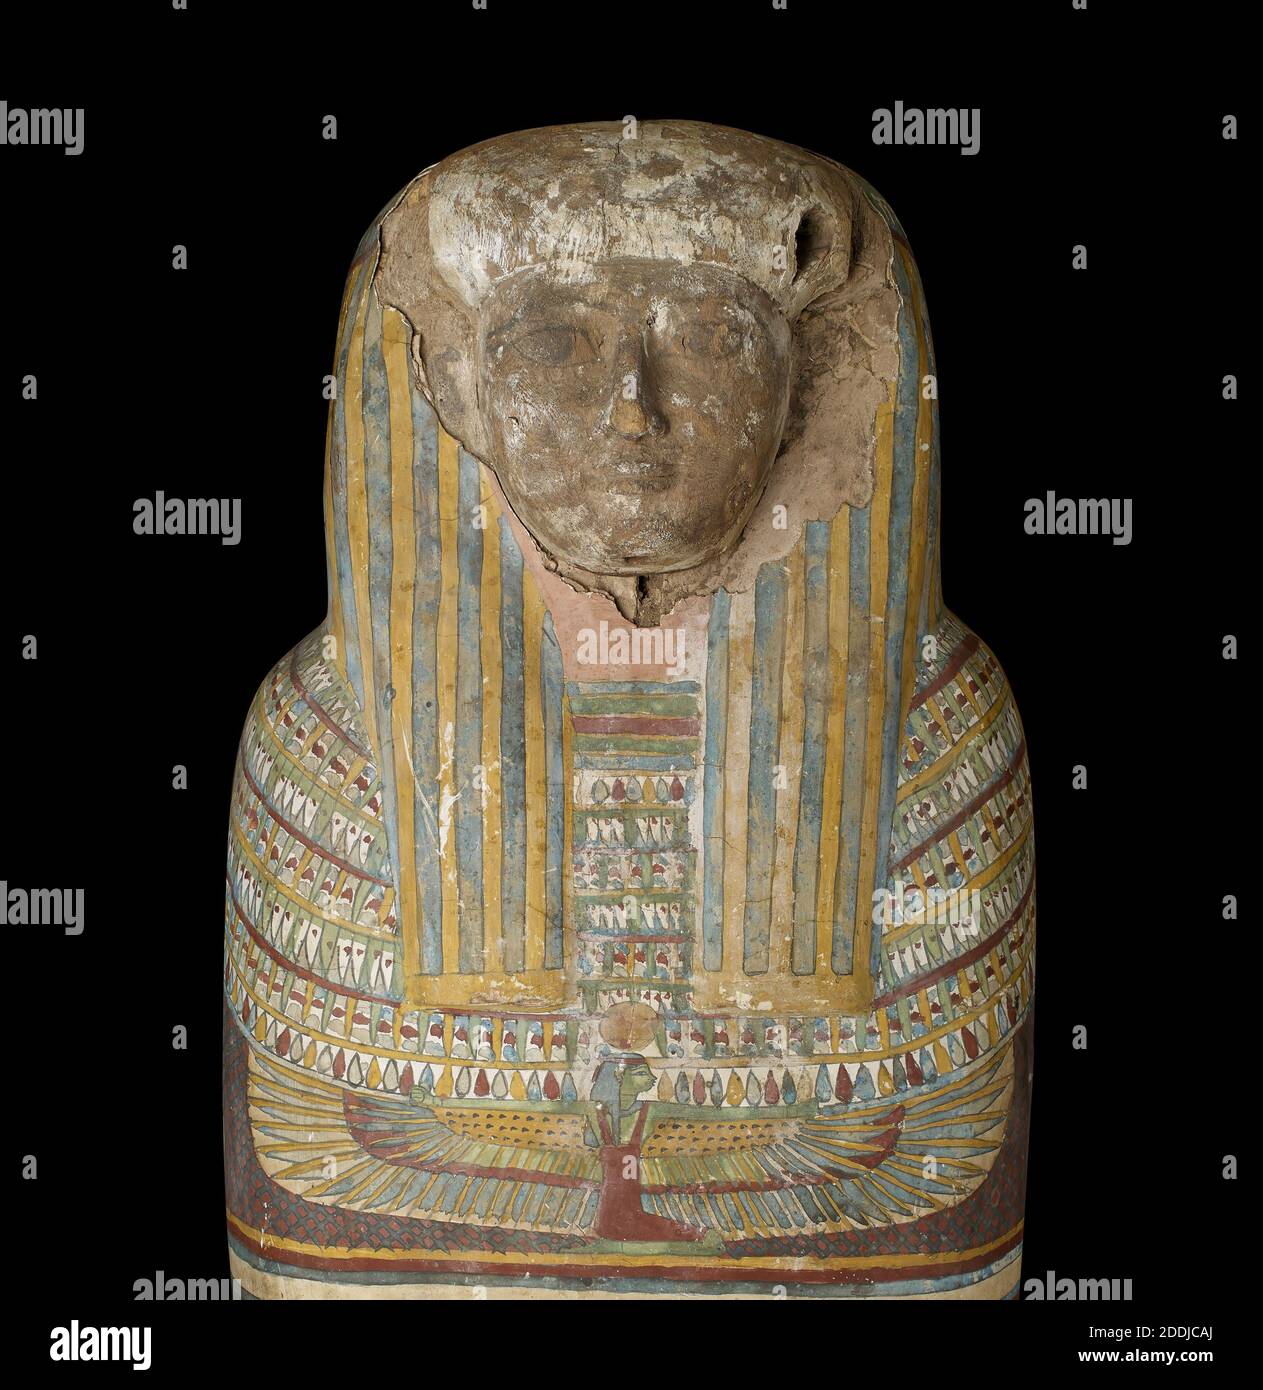 Painted plaster on wood coffin belonging to Lady Tadi-en-hent awy daughter of Nes-Khonsu, 650-500 BC, Late Period (26th Dynasty), Ancient Egypt, Sarcophagus, Death, Coffin, Mummy, hieroglyphs Stock Photo